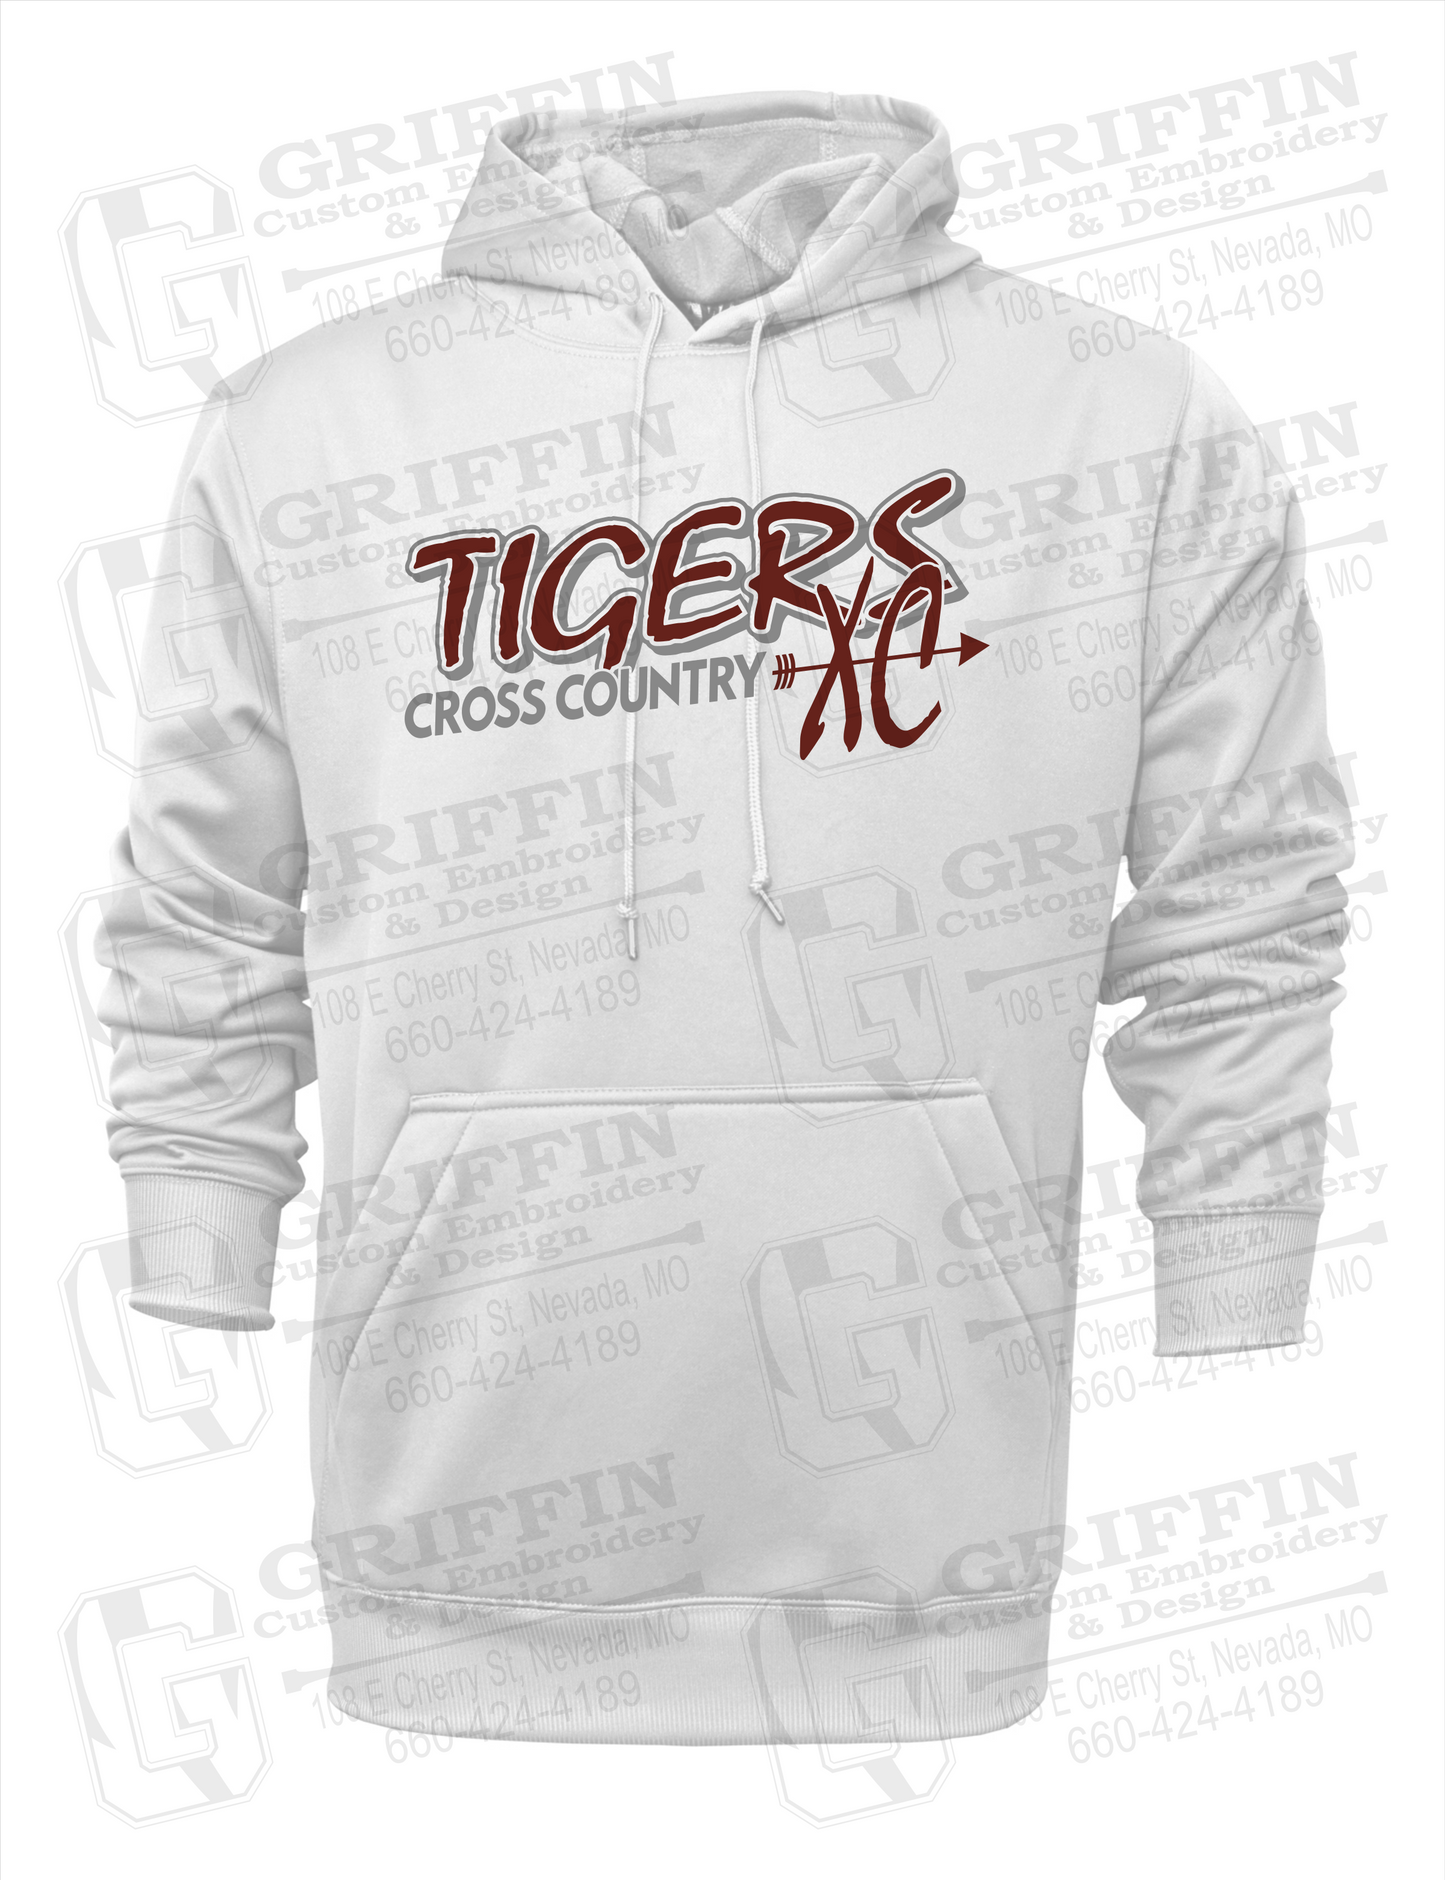 Nevada Tigers 23-S Youth Hoodie - Cross Country